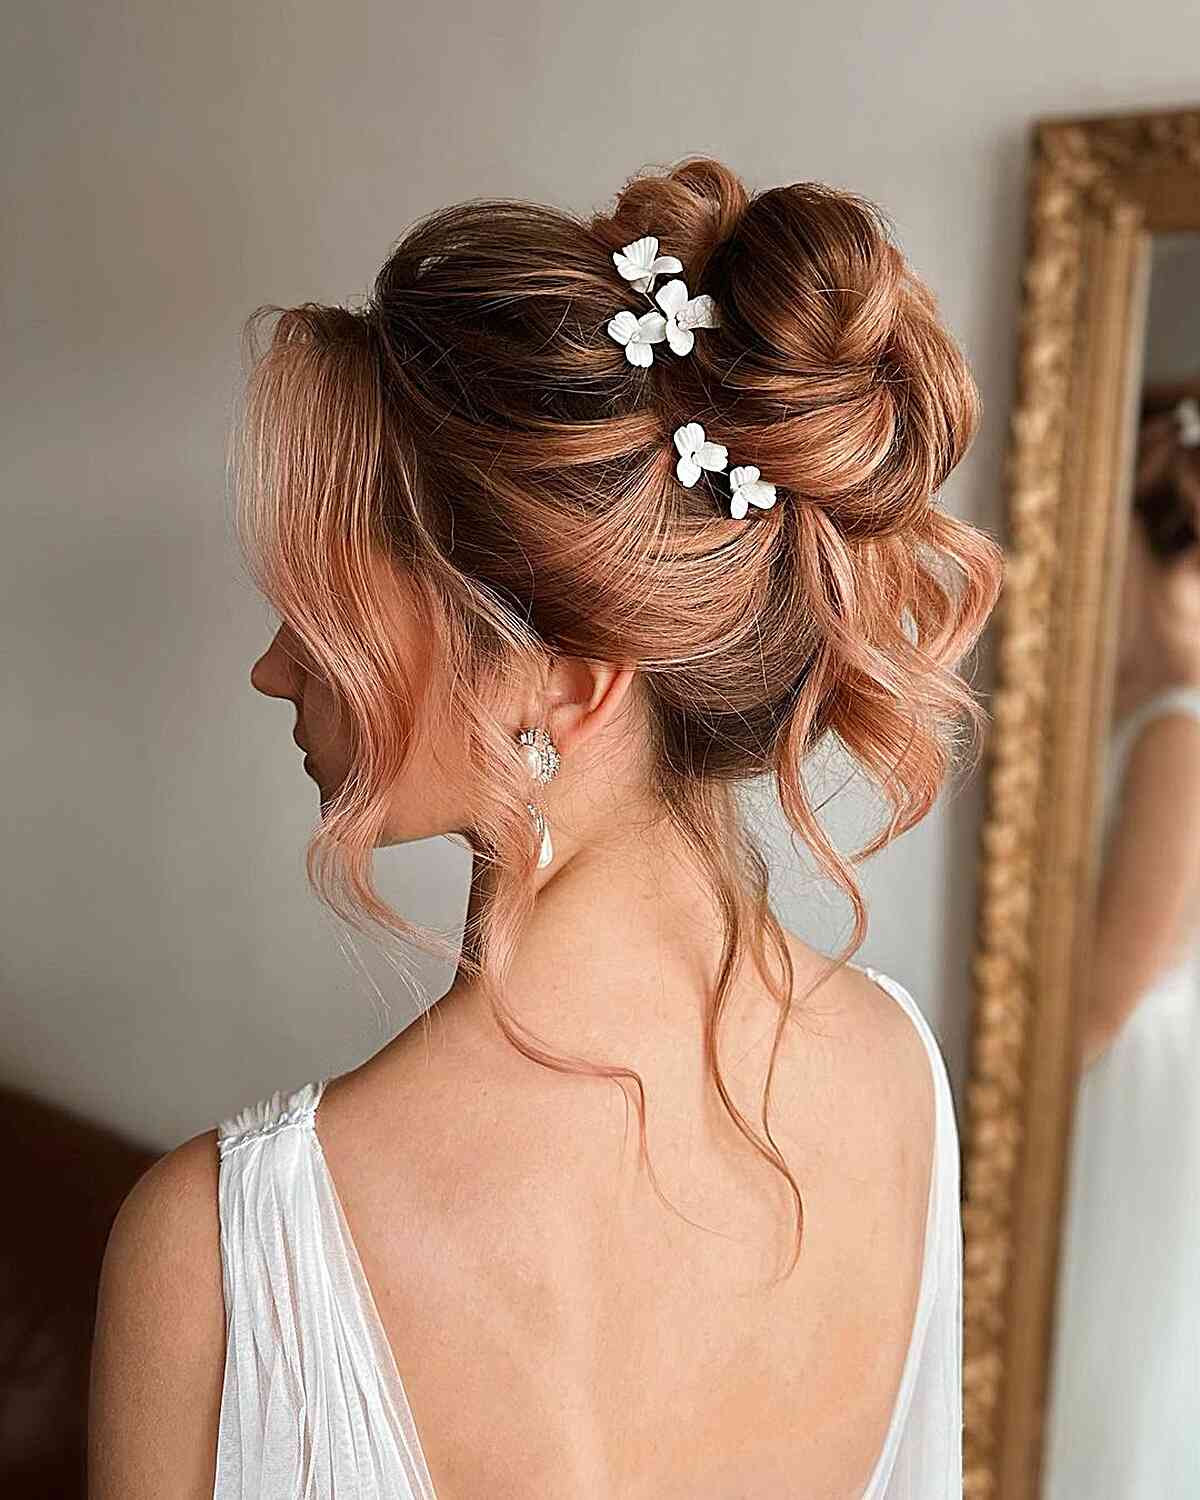 Fancy Loose Updo in a Bun with Floral Pins with Face-Framing Tendrils